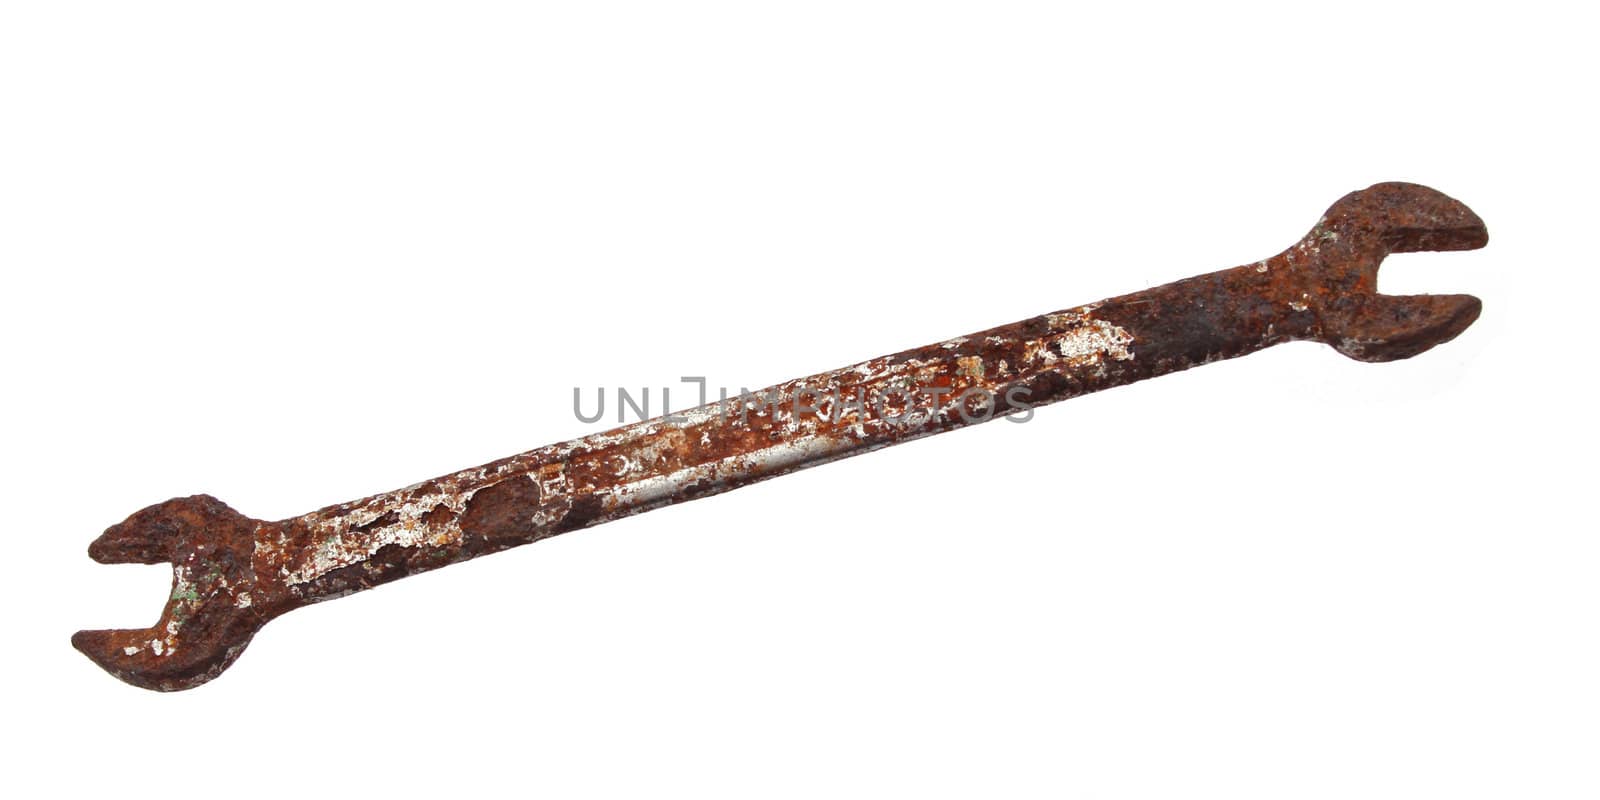 Rusty spanner on a plain white background.